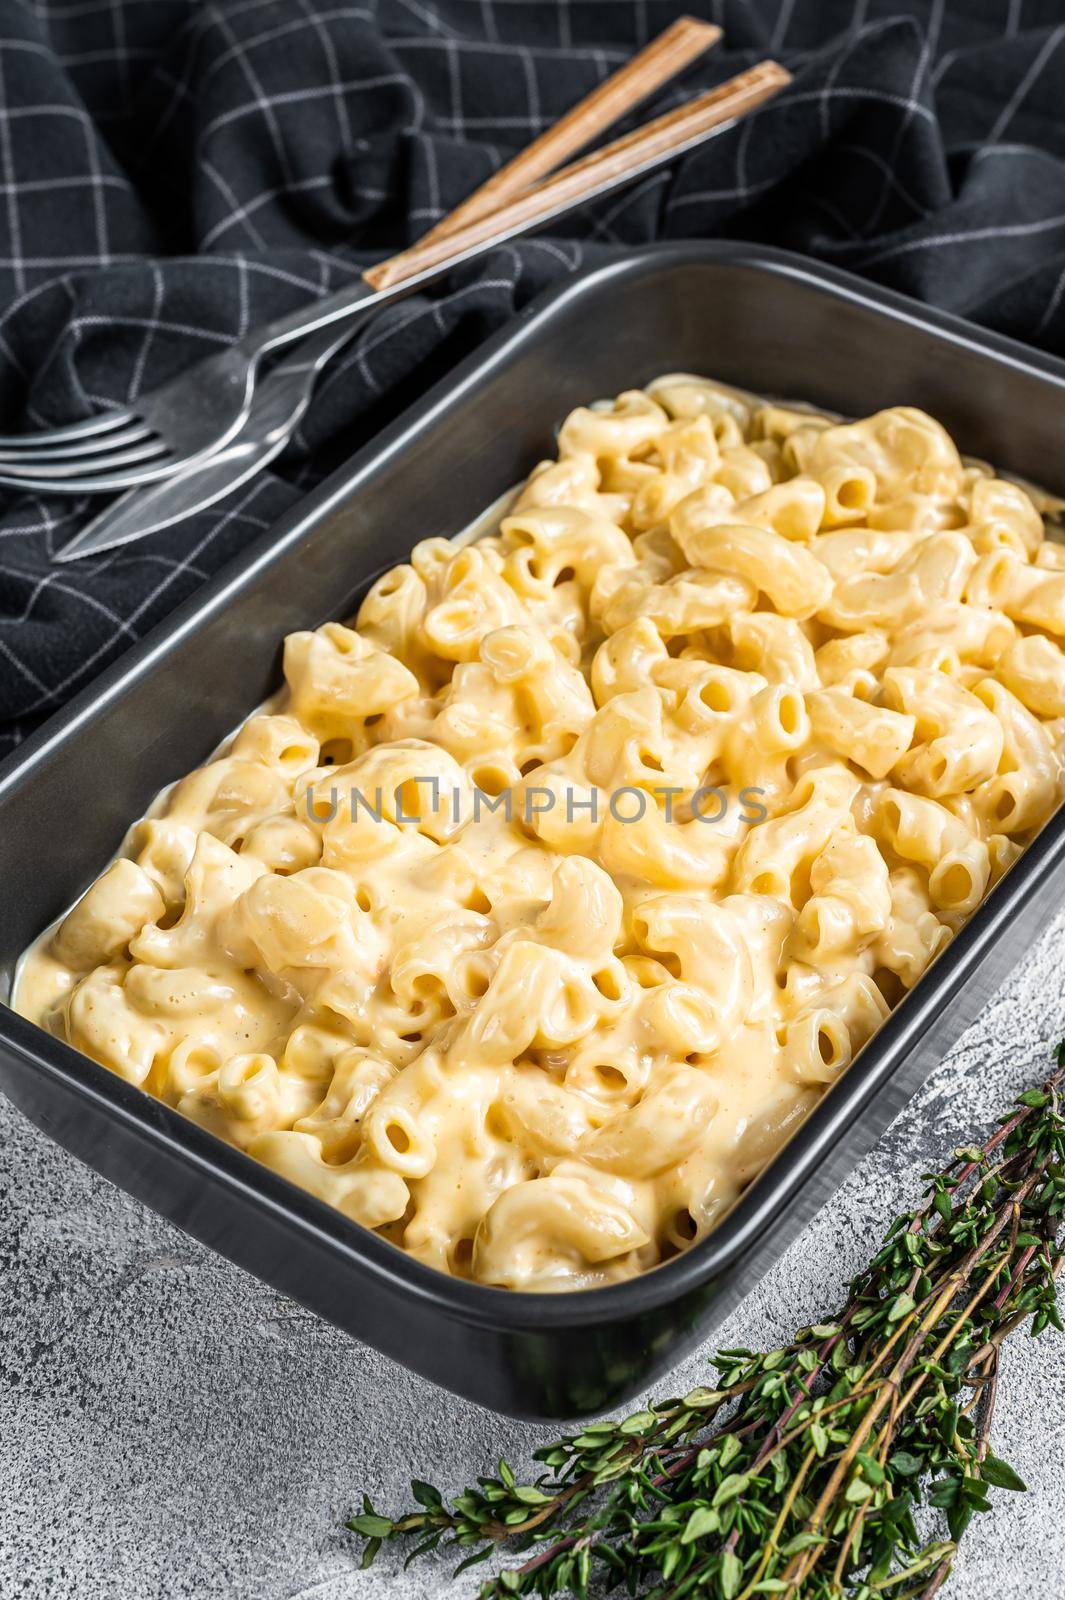 Mac and cheese american macaroni pasta with cheesy Cheddar sauce. White background. Top view.